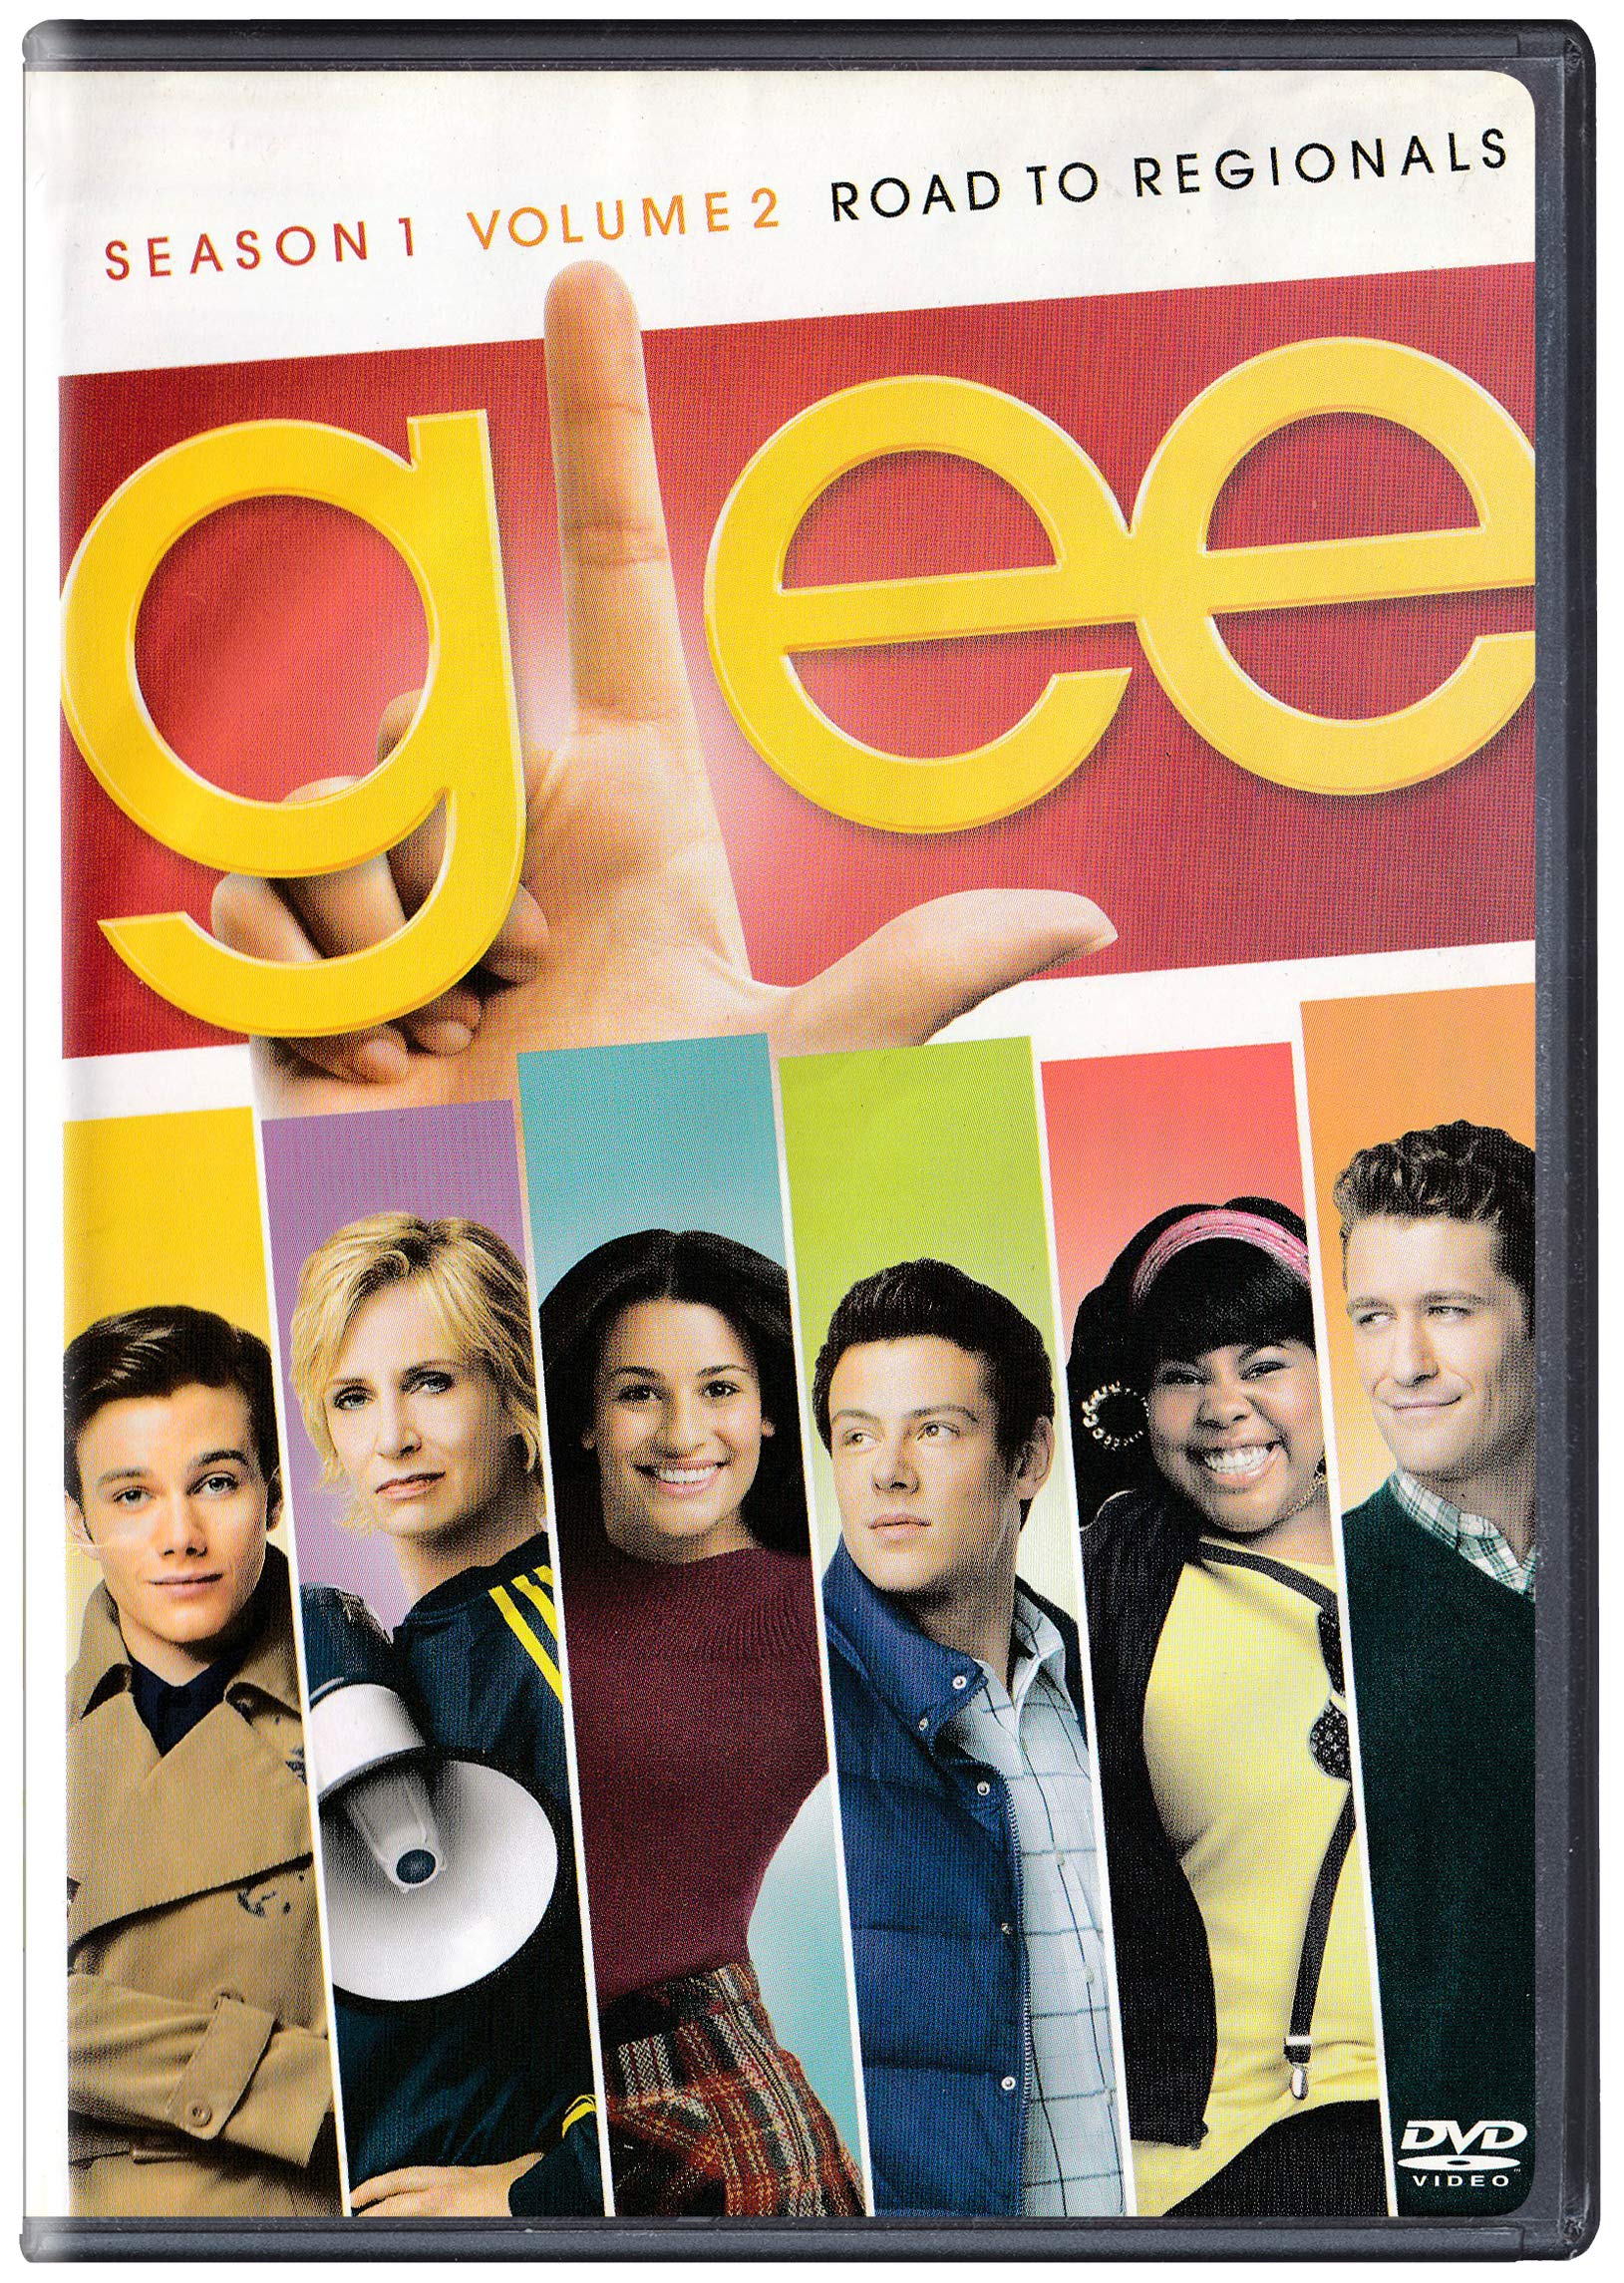 glee-the-complete-season-1-vol-2-movie-purchase-or-watch-online